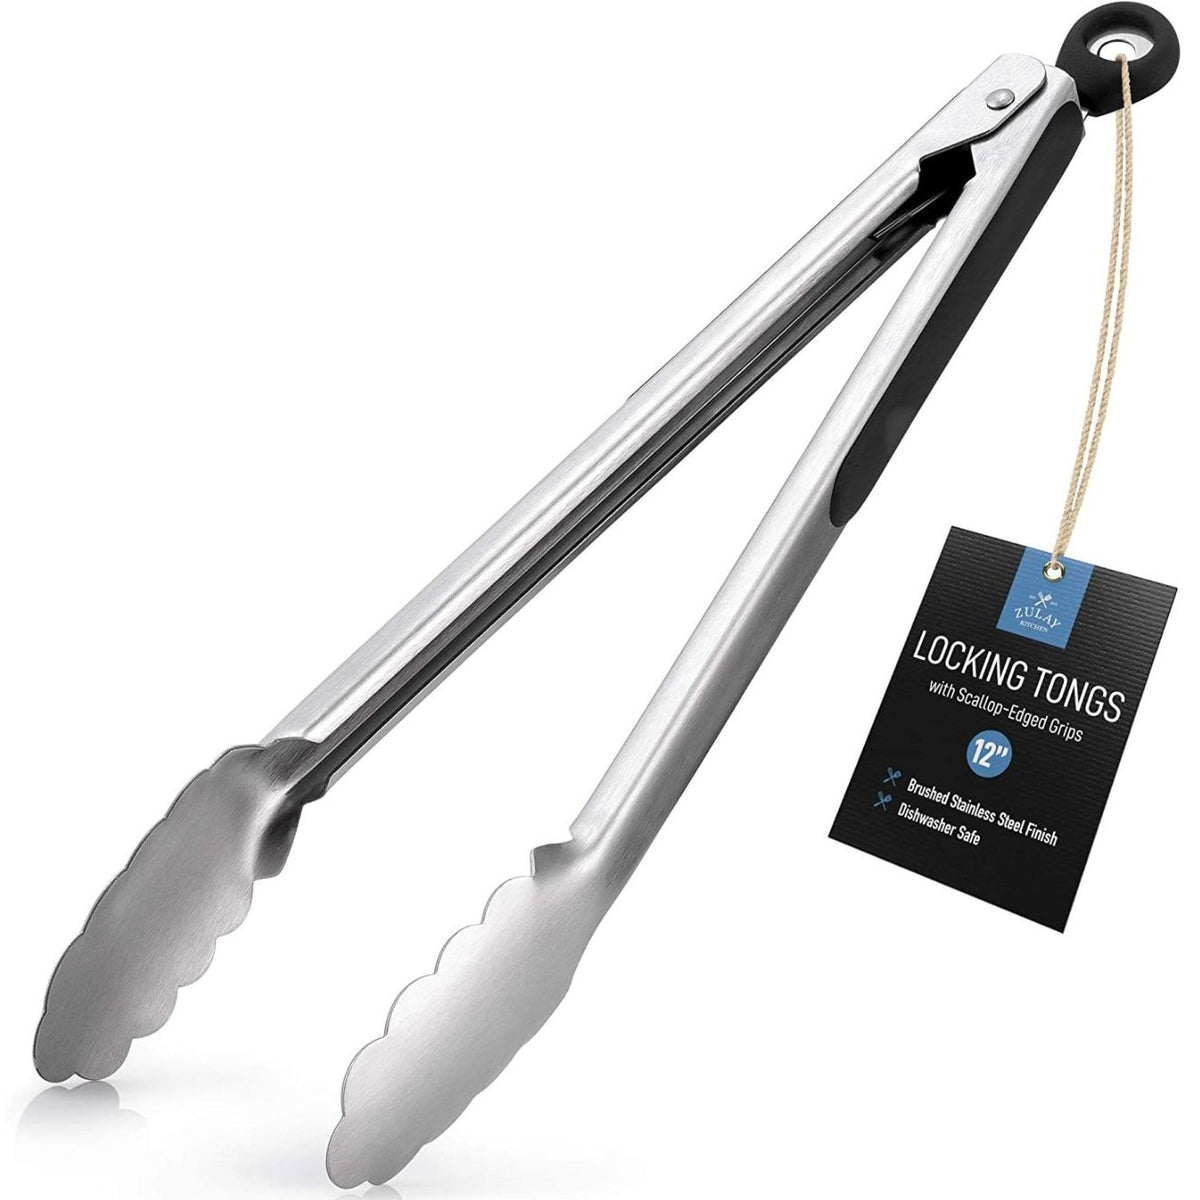 Restaurantware Met Lux Stainless Steel Kitchen Tongs - Scalloped - 13 1/2 inch x 6 inch x 1 1/2 inch - 1 Count Box